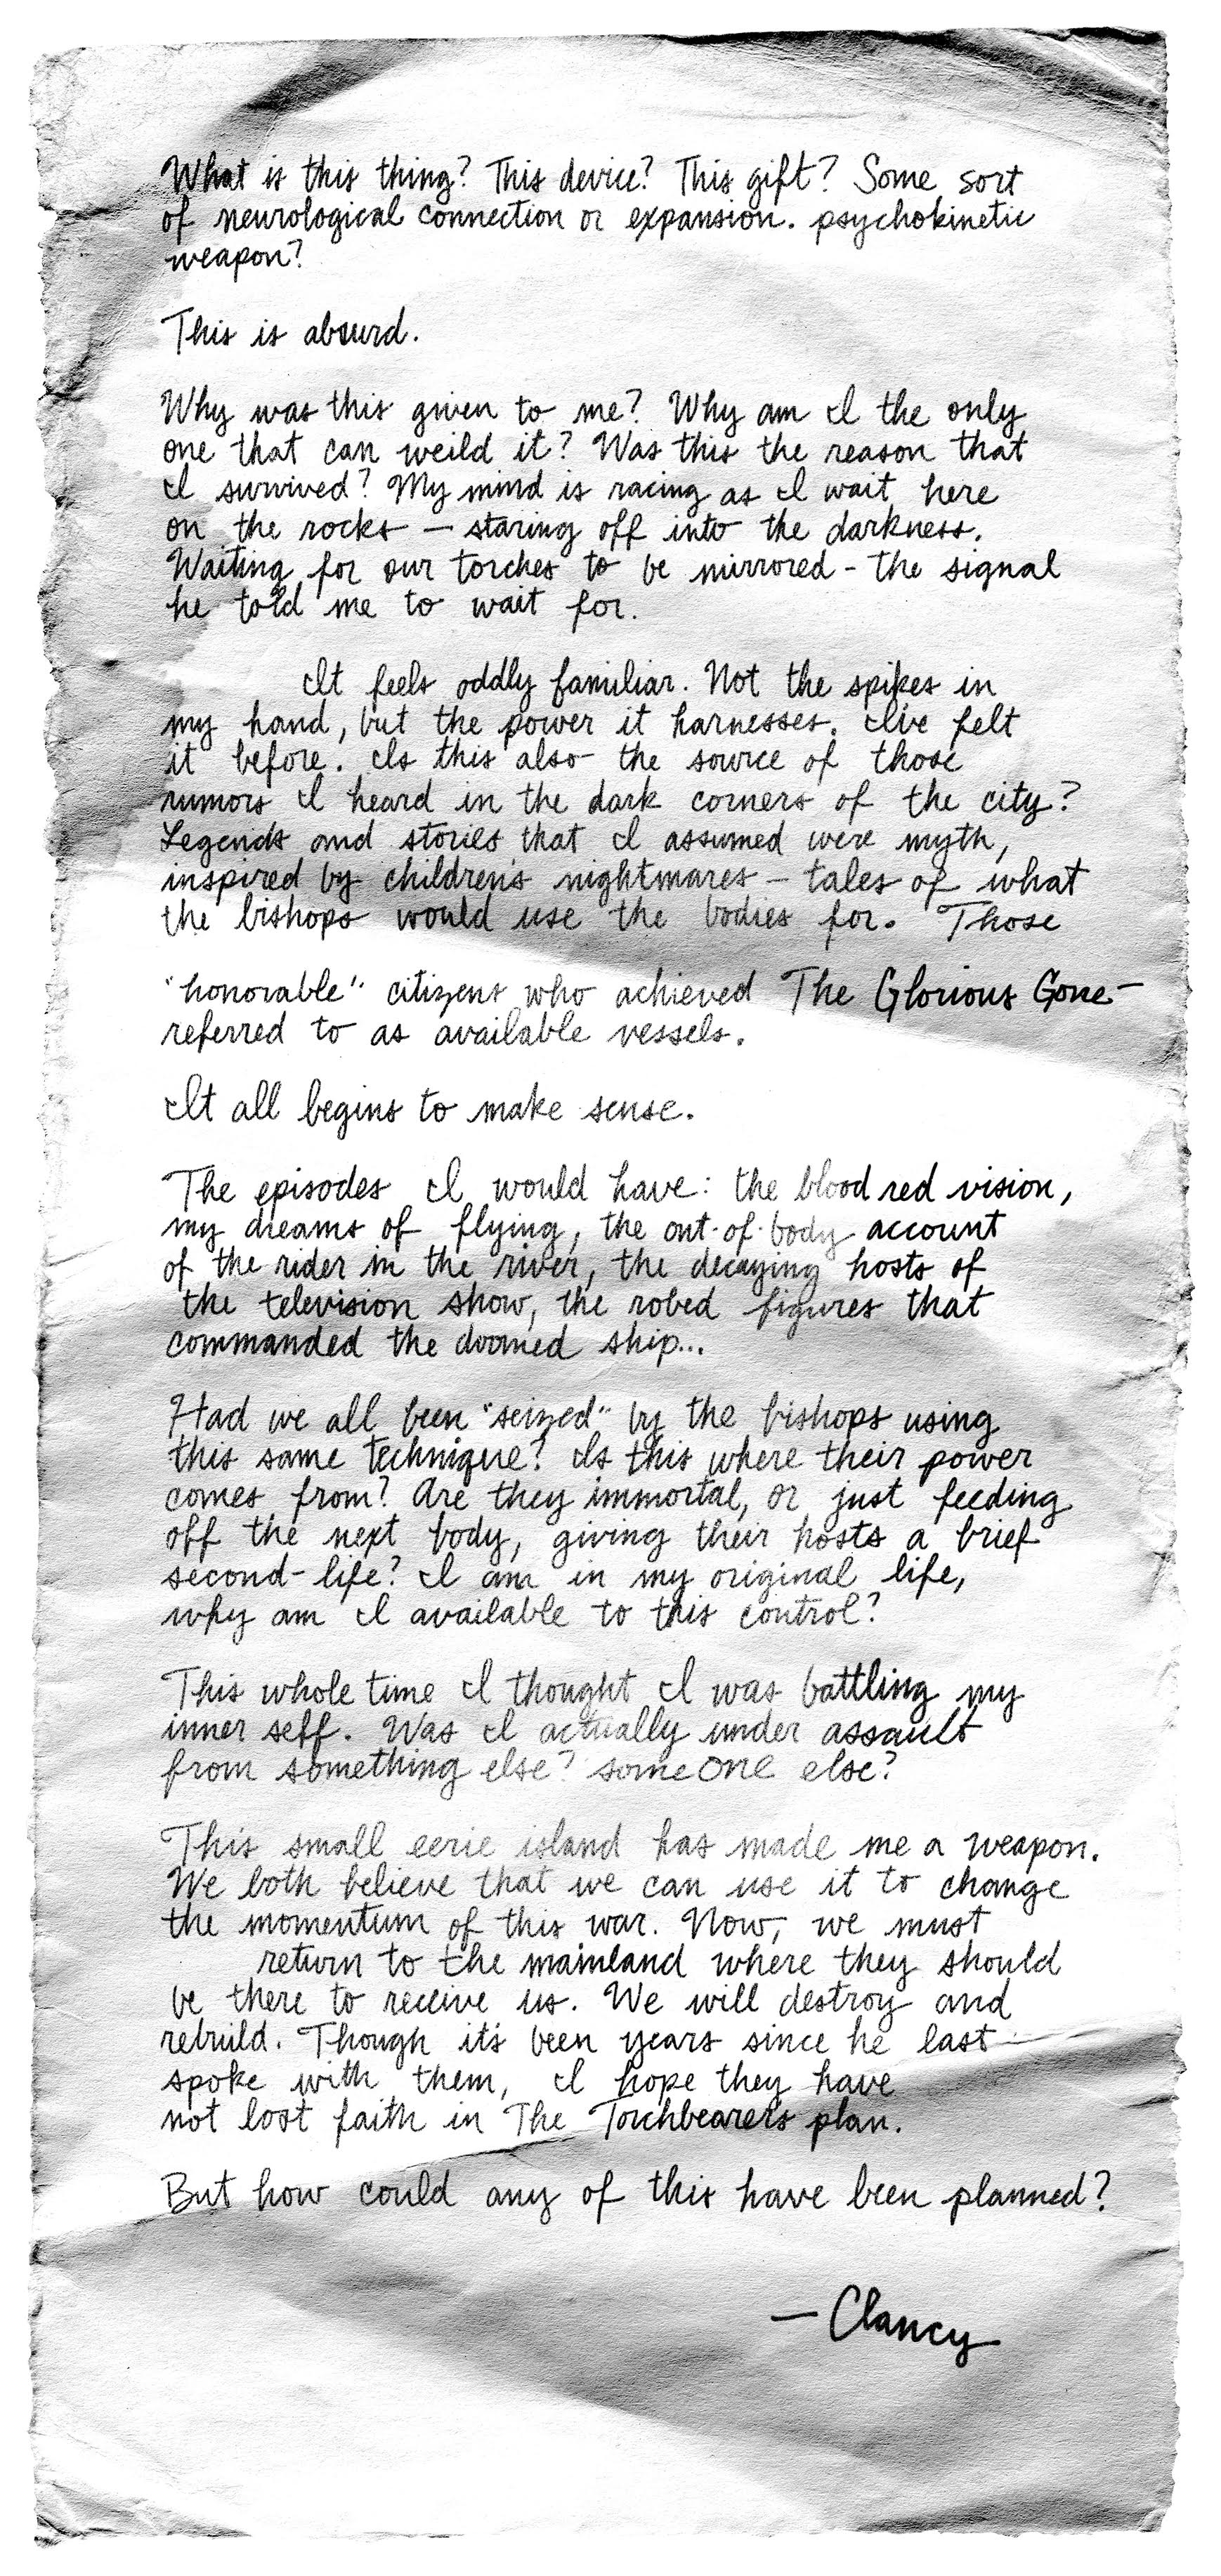 Alt text: Scan of long handwritten note on a distressed piece of paper. Note is written in cursive and is signed by Clancy at the bottom.